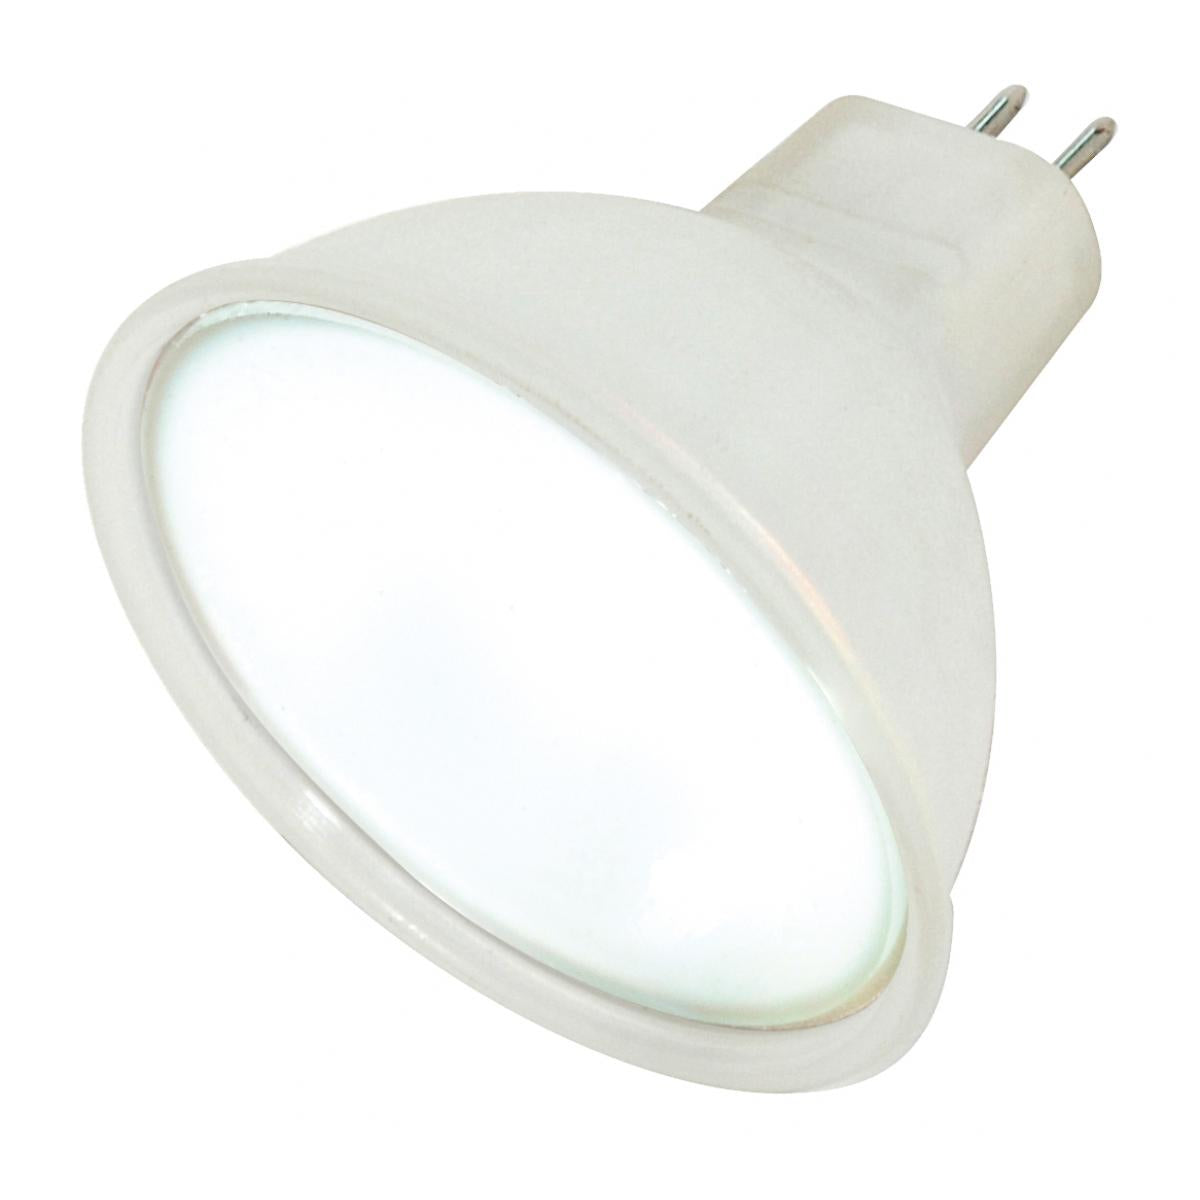 Satco S4354 20 Watt Halogen MR16 Frosted 2000 Average rated hours 255 Lumens Miniature 2 Pin Round base 12 Volt